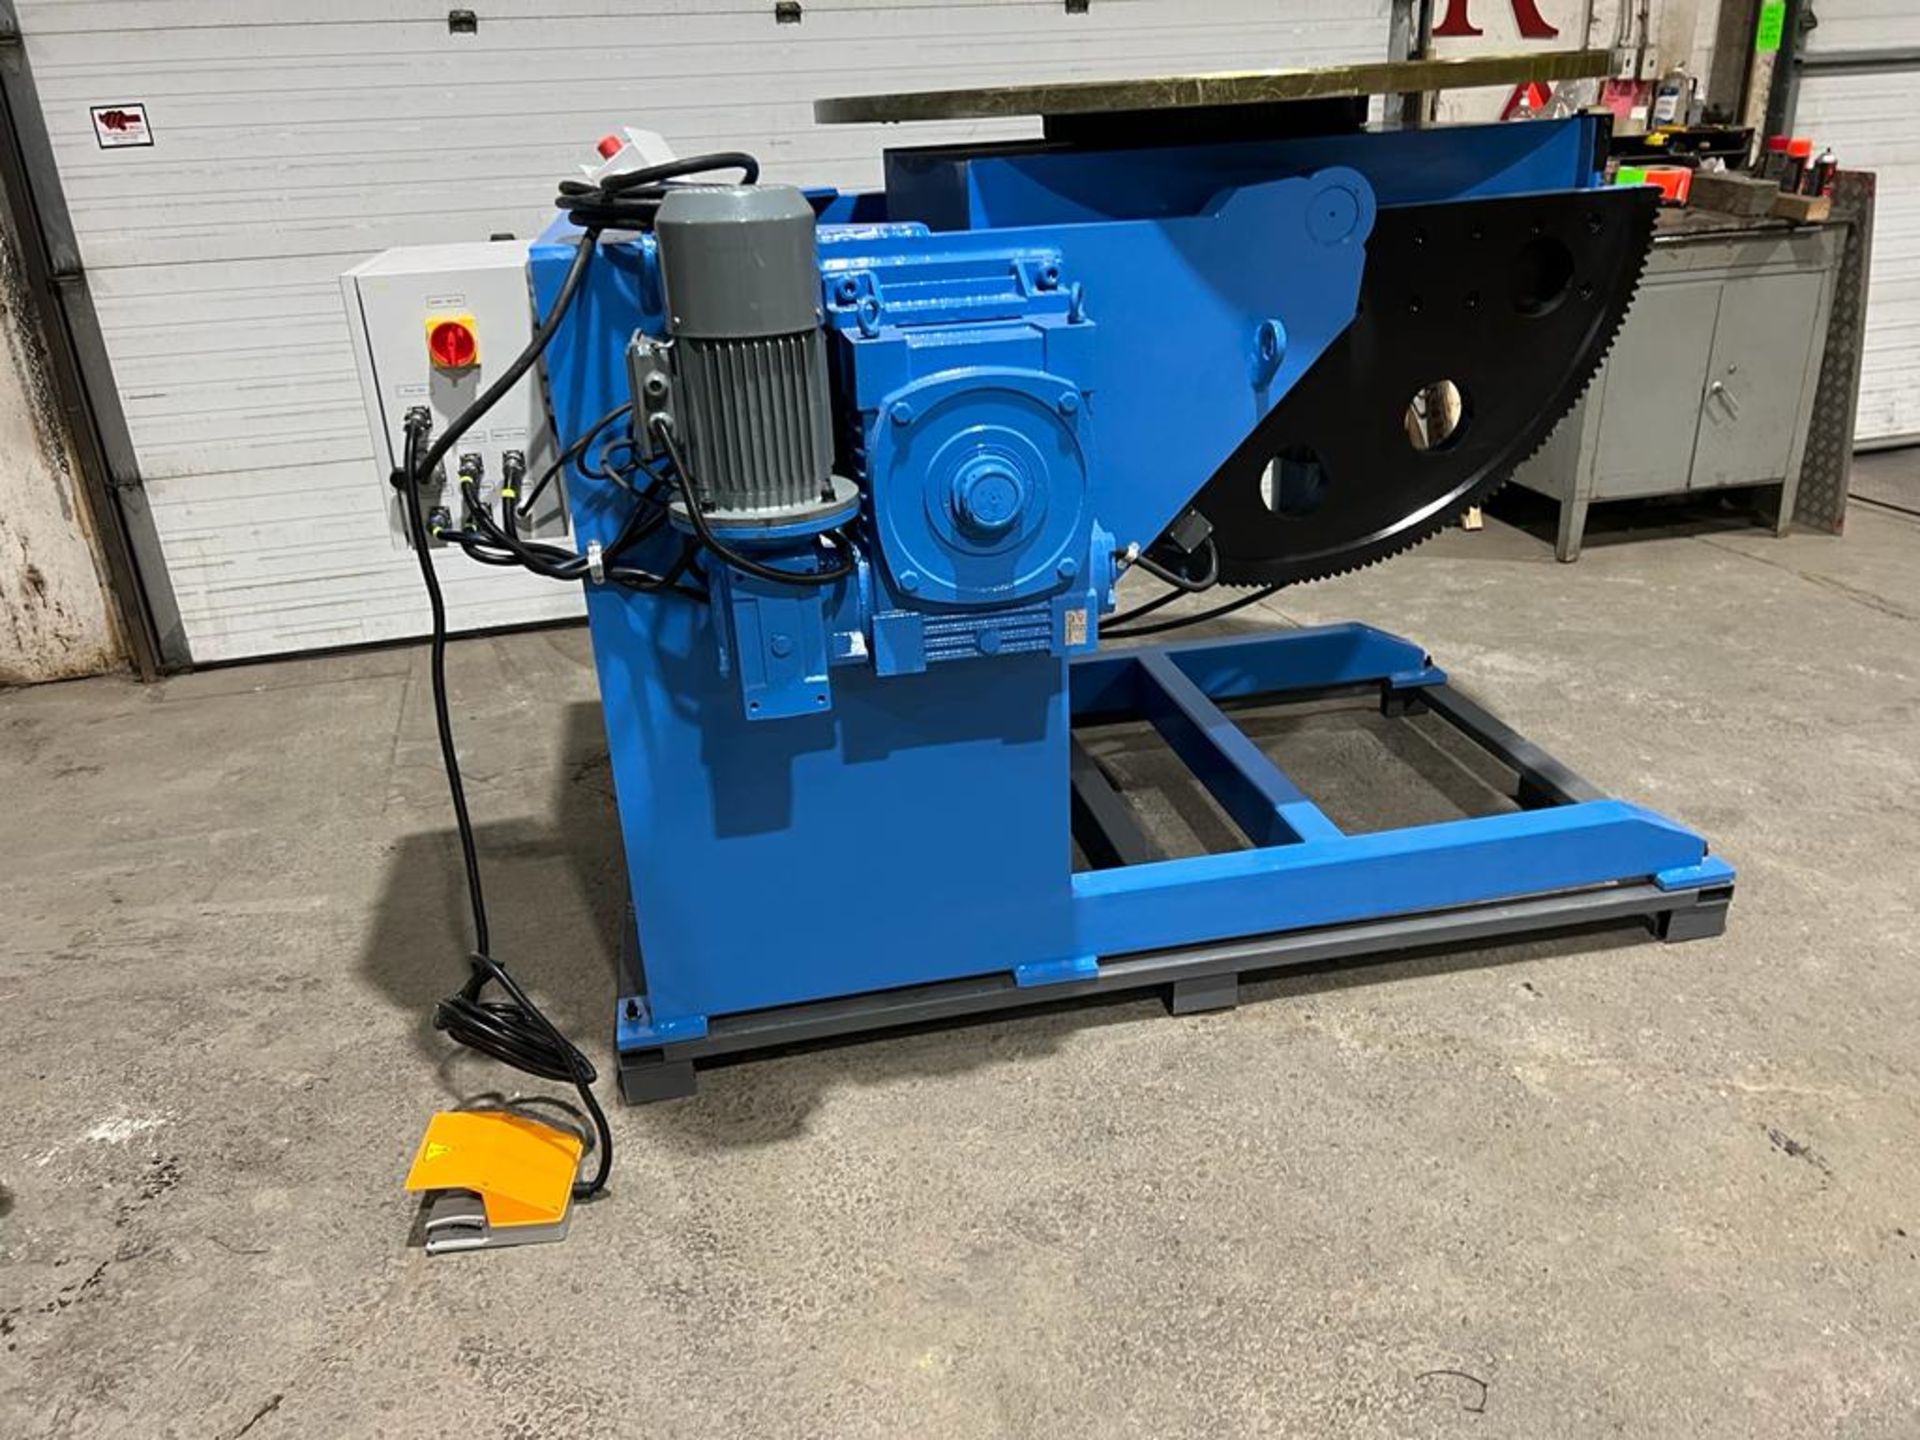 Verner model VD-8000 WELDING POSITIONER 1500lbs capacity - tilt and rotate with variable speed drive